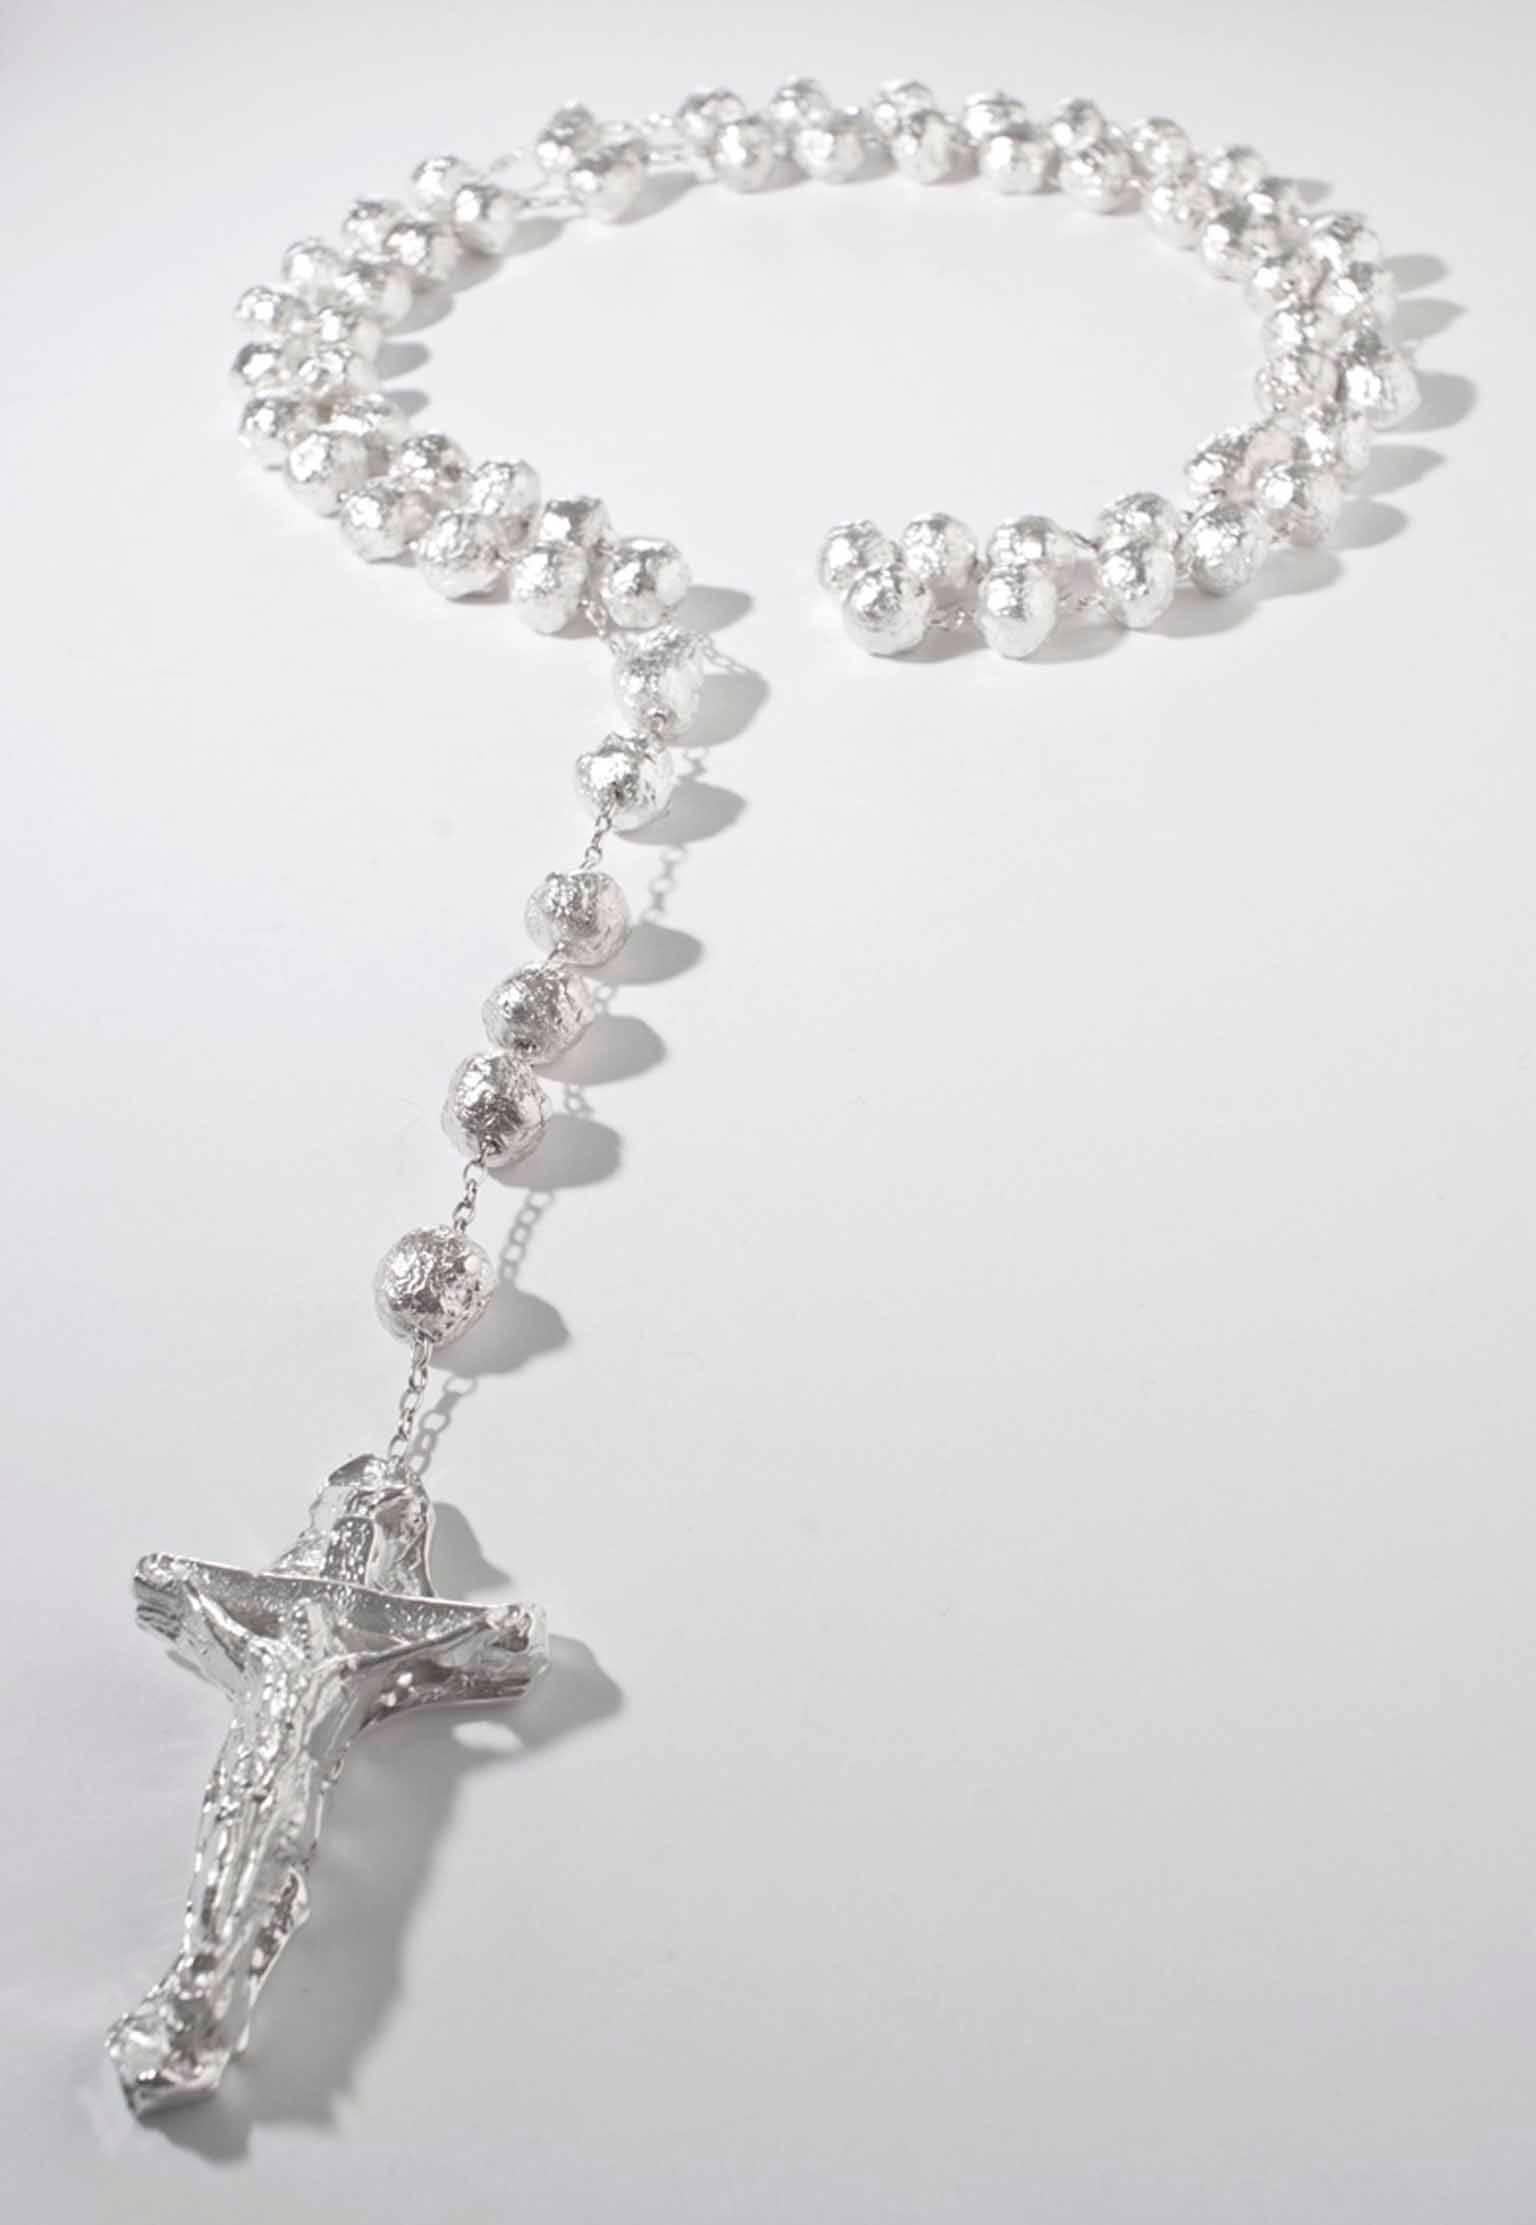 Silver Necklace/ Rosary
edition of 5

The 2011 collaboration between Kendell Geers and Elisabetta Cipriani Gallery resulted in three different iconic pieces that convey the characteristic intensity of the artist’s works. Speaking in Tongues